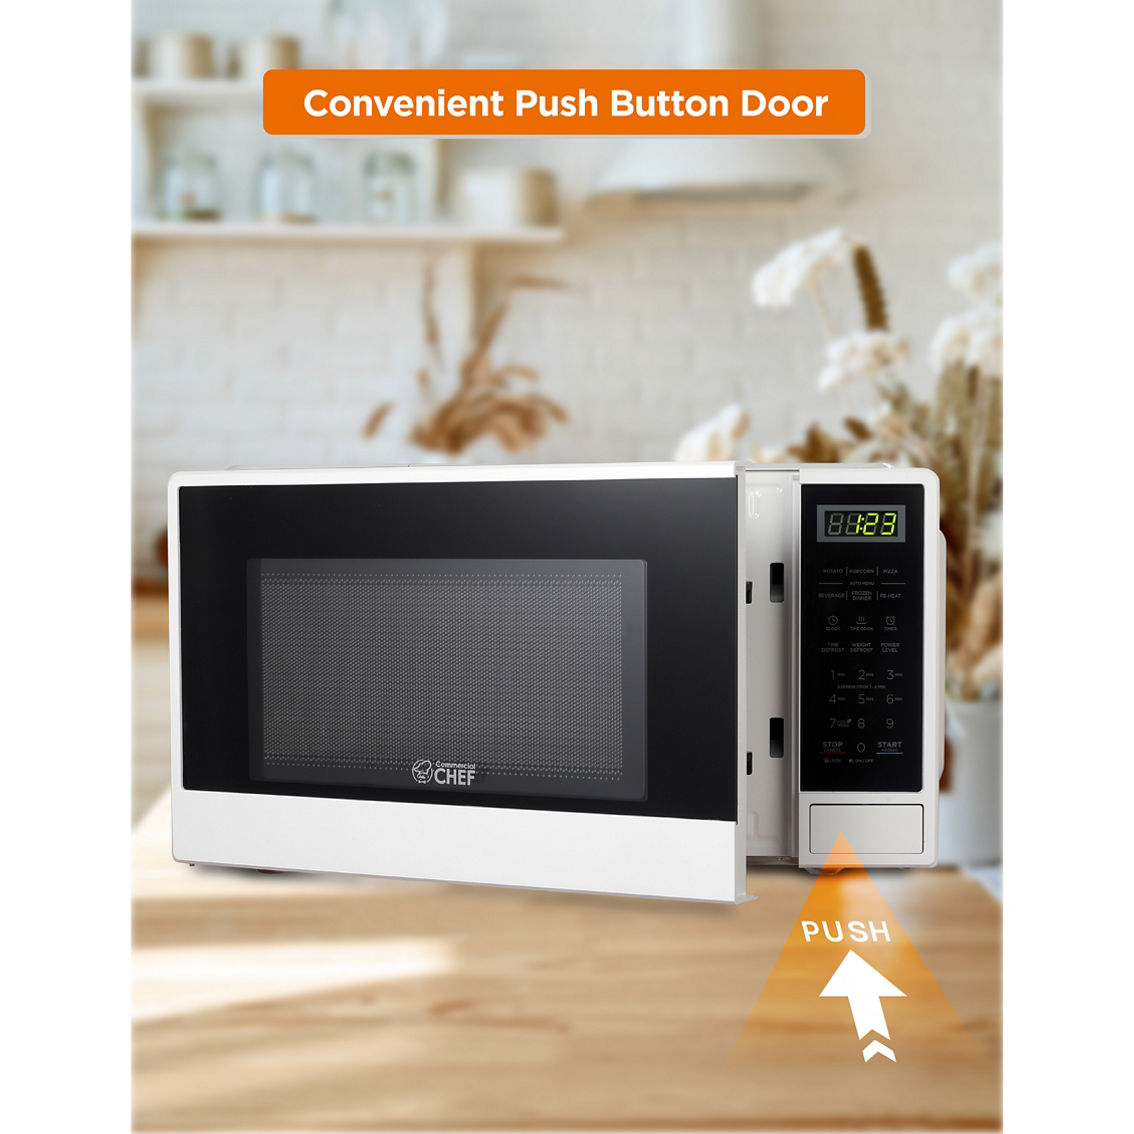 Commercial Chef 1.1 cu. ft. Counter Top Microwave - Image 2 of 7